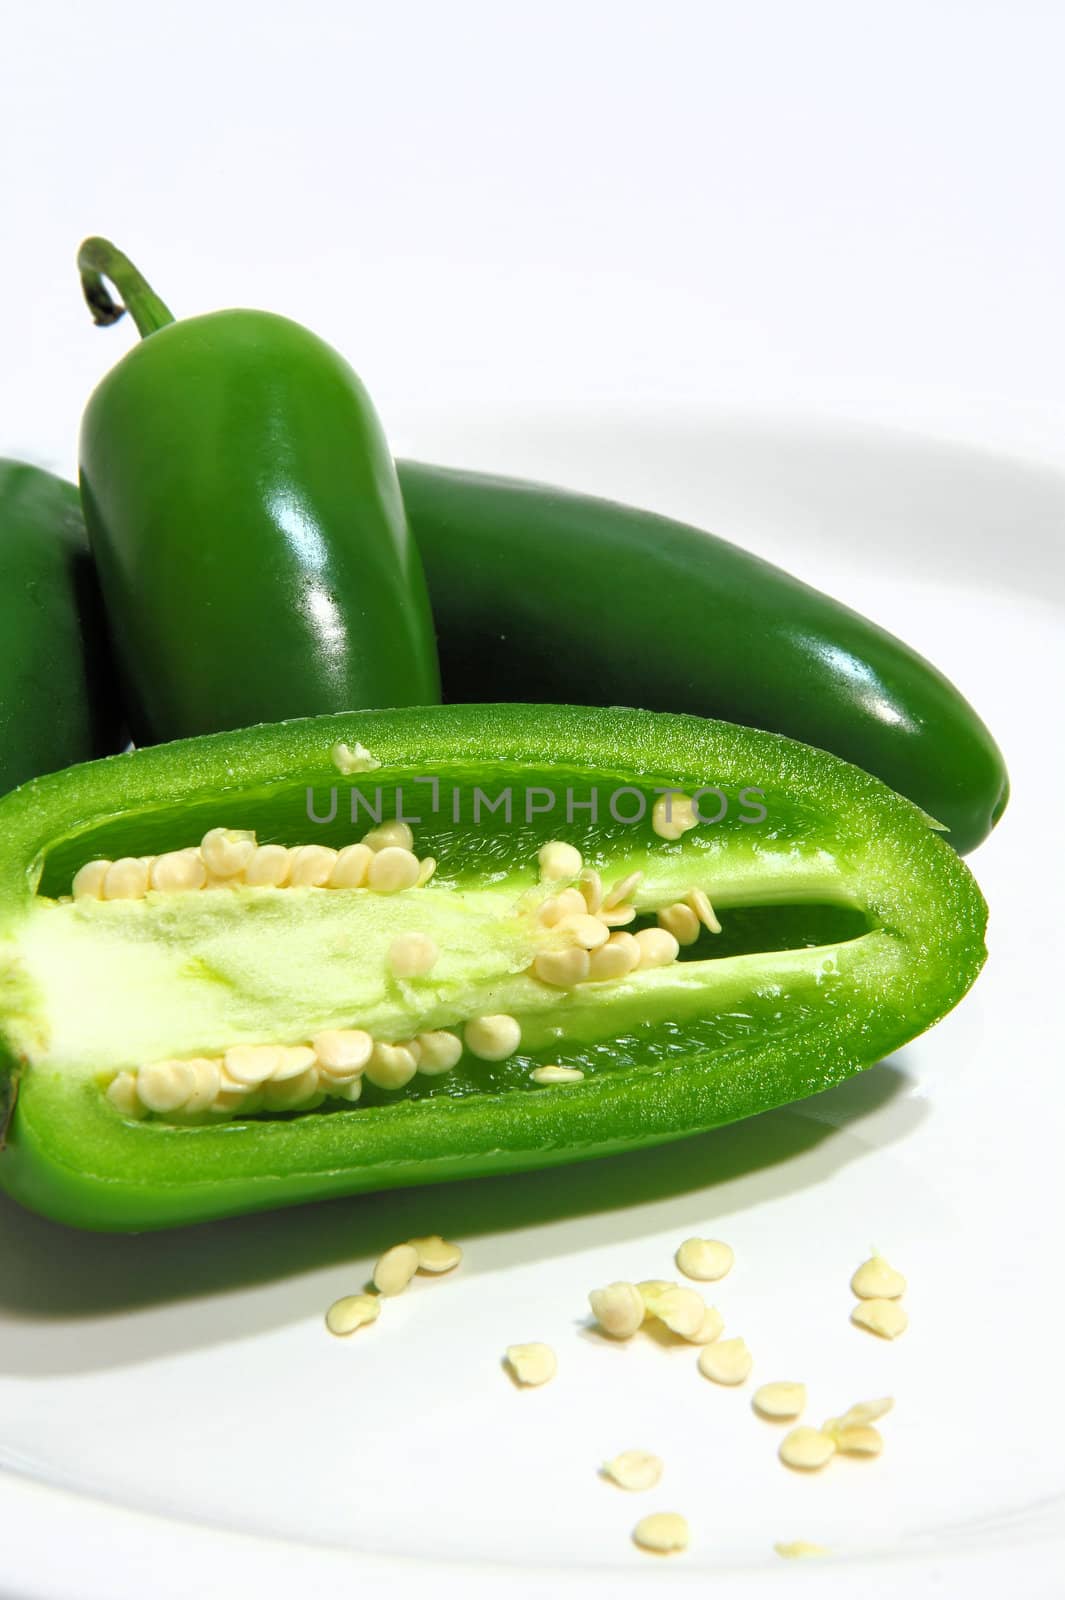 Jalapeno Pepper And Seeds by bendicks